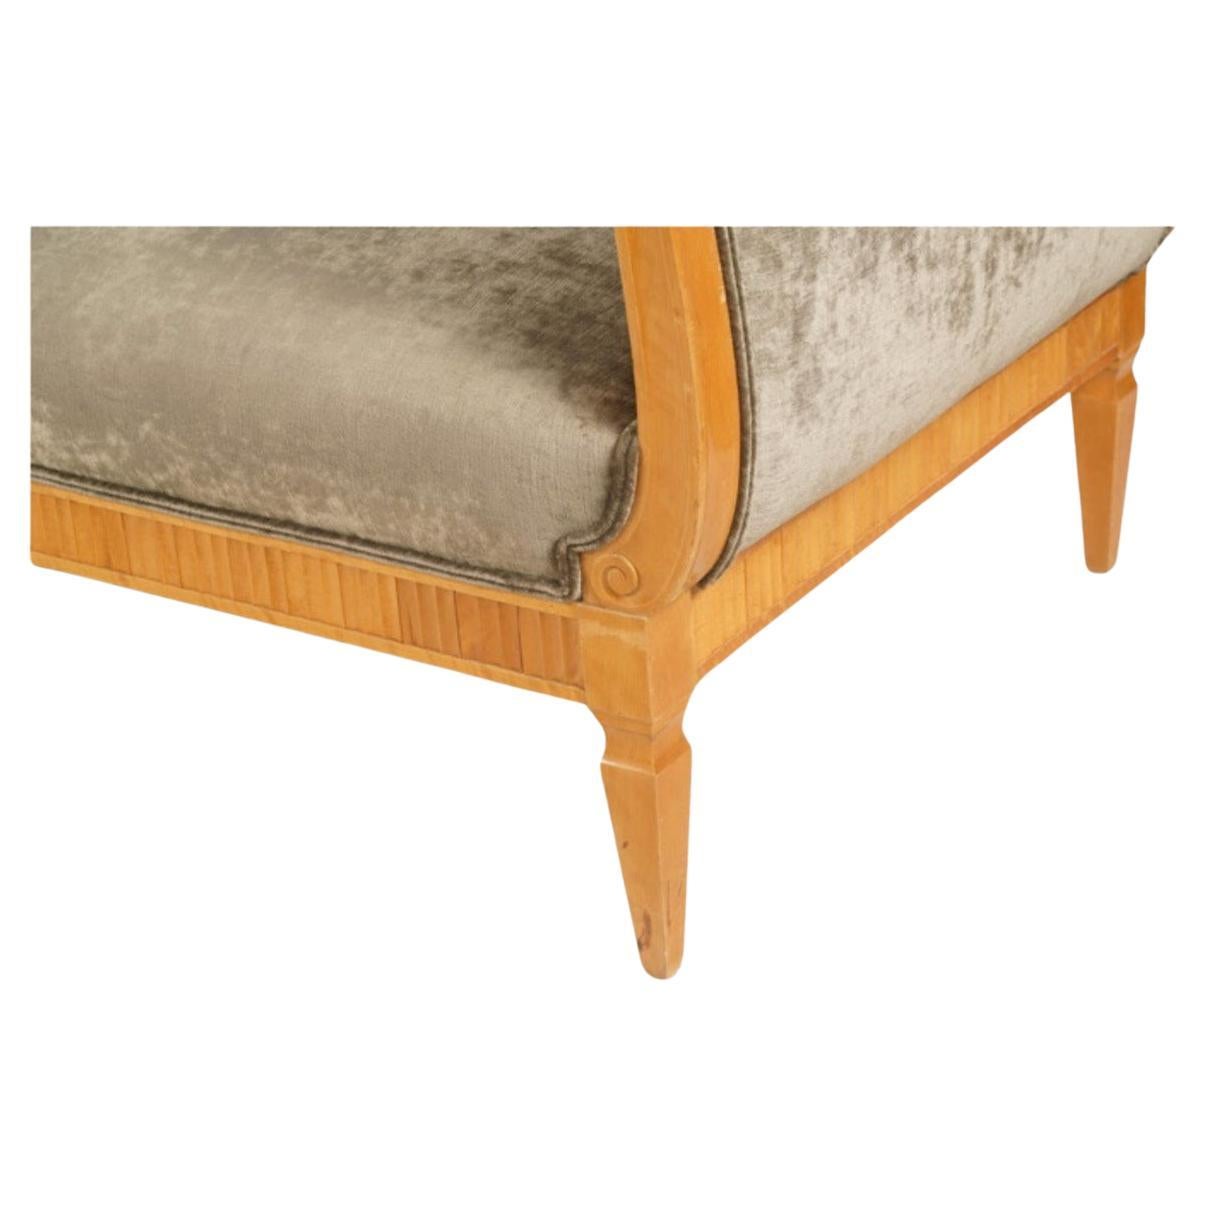 19th Century Neoclassical Swedish Satinwood Daybed or Recamier For Sale